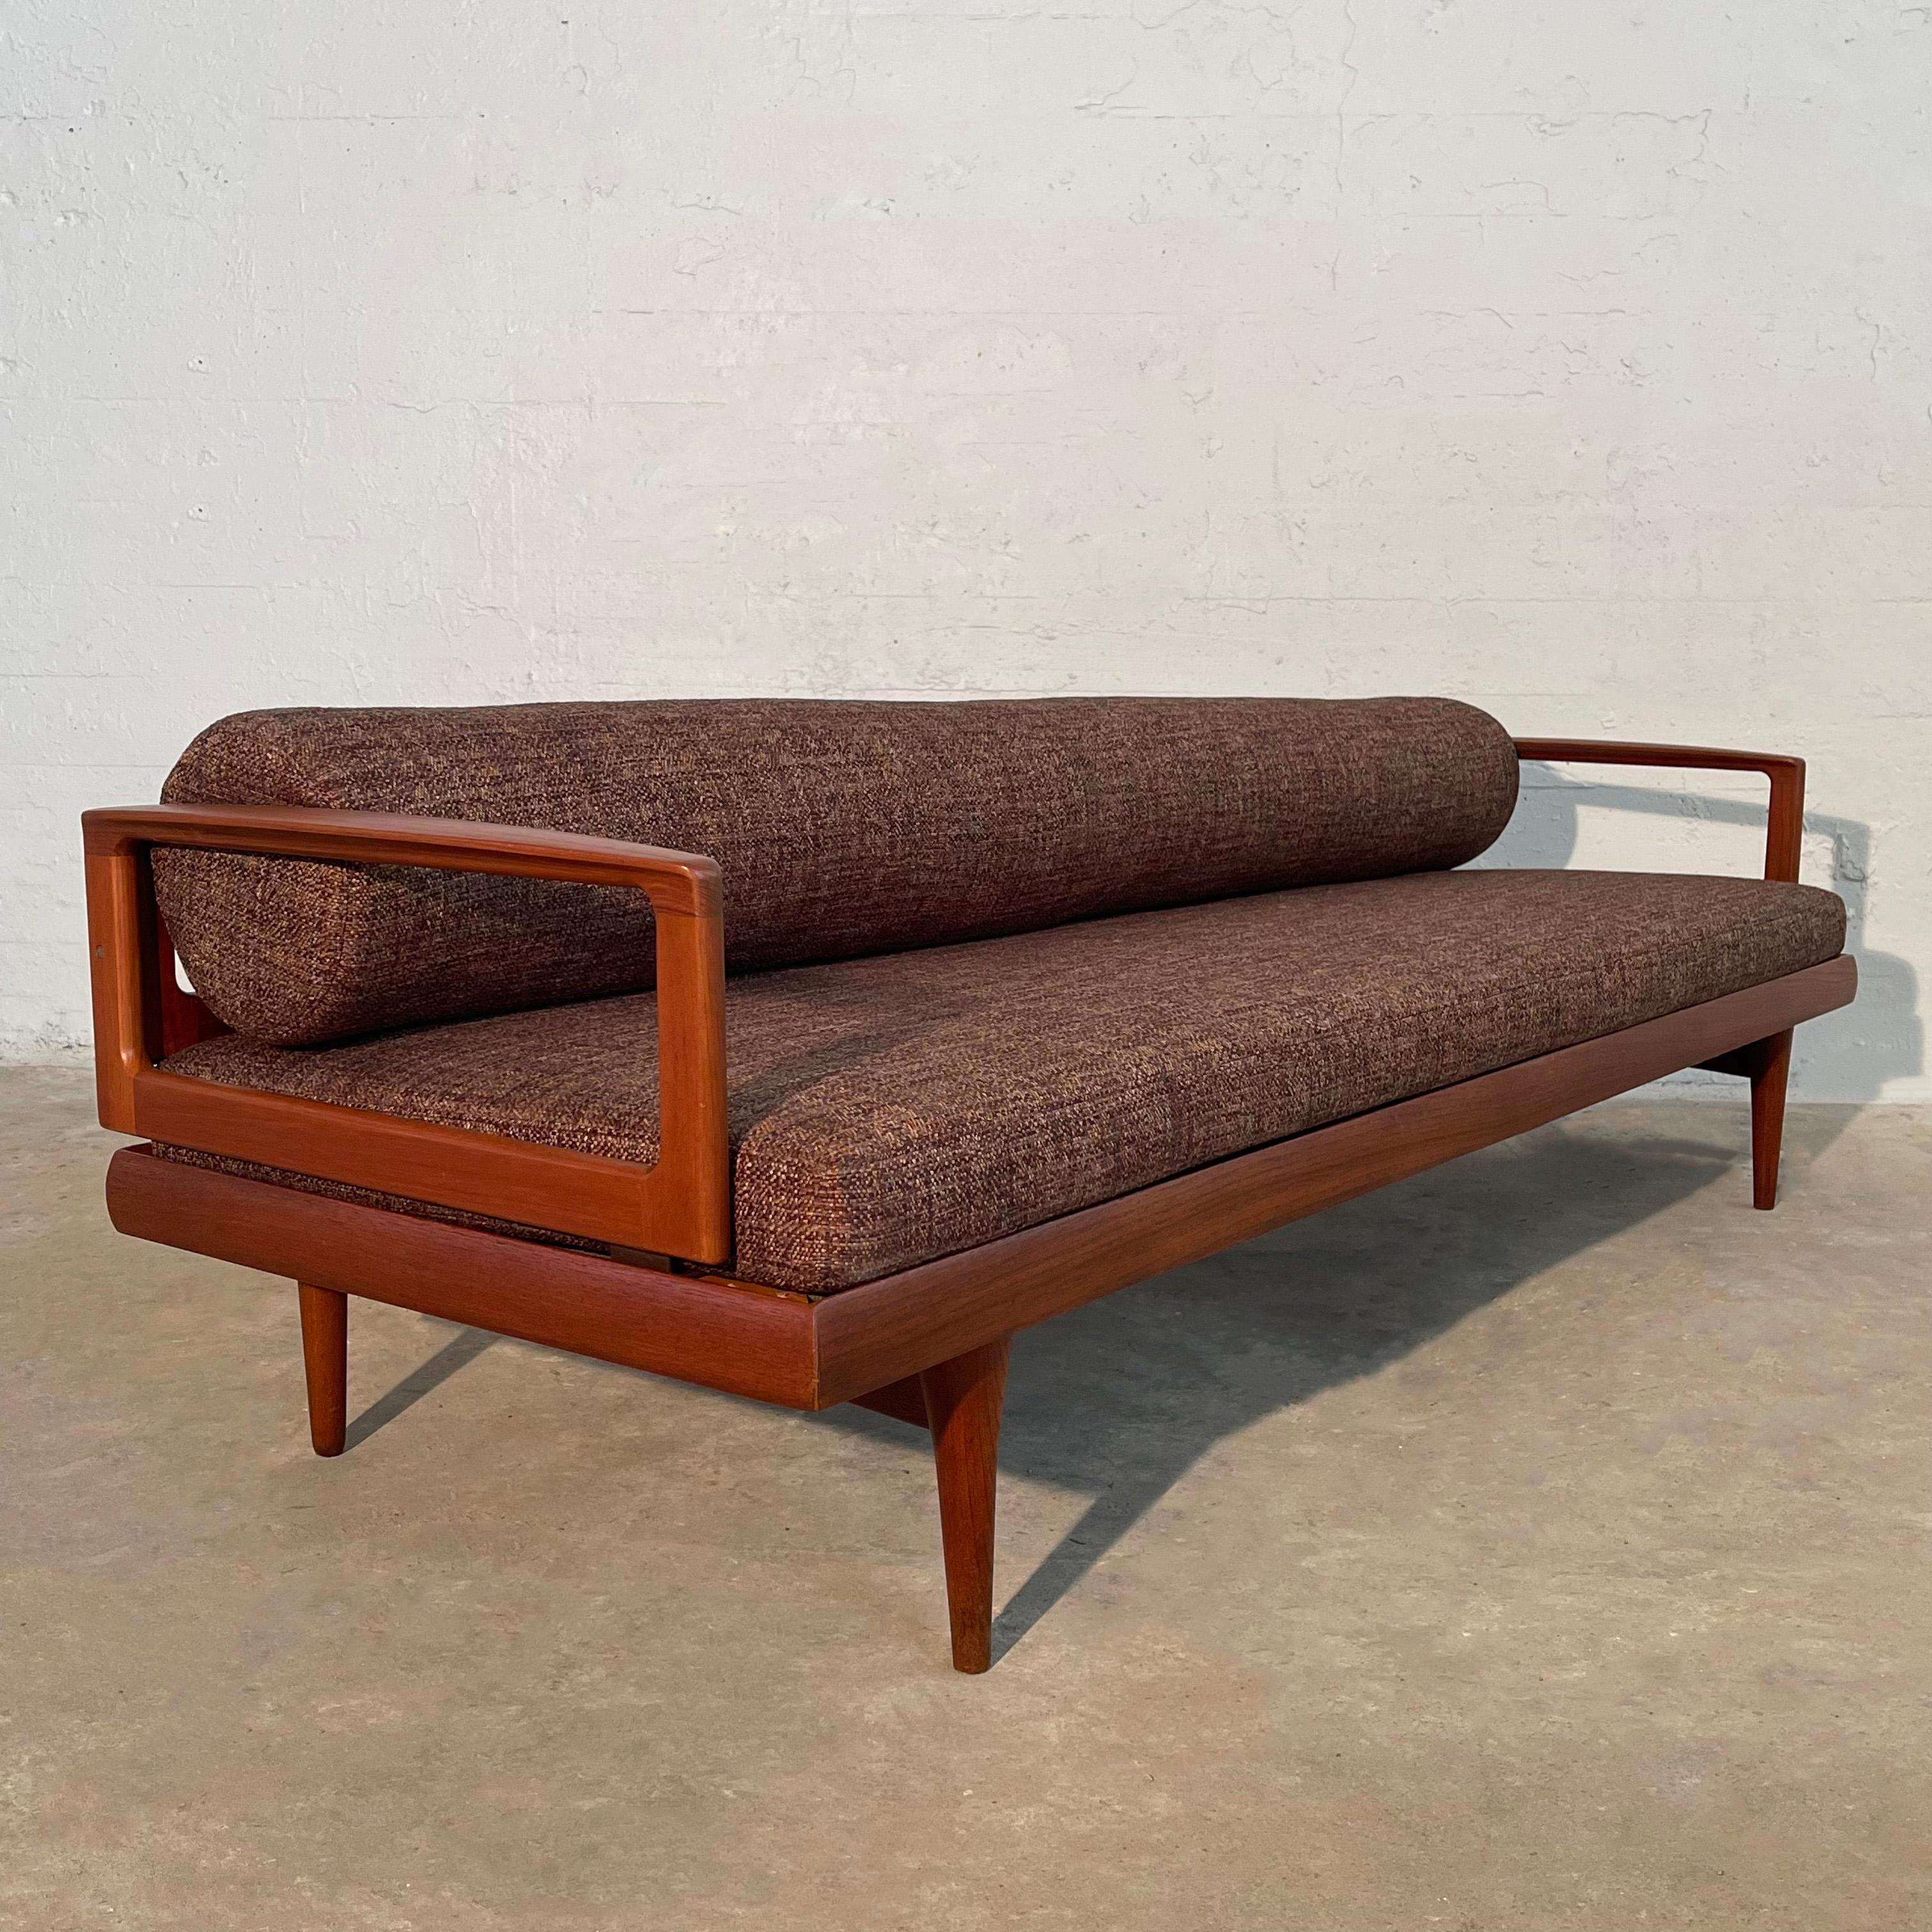 Scandinavian Modern Low Teak Upholstered Sofa In Good Condition For Sale In Brooklyn, NY